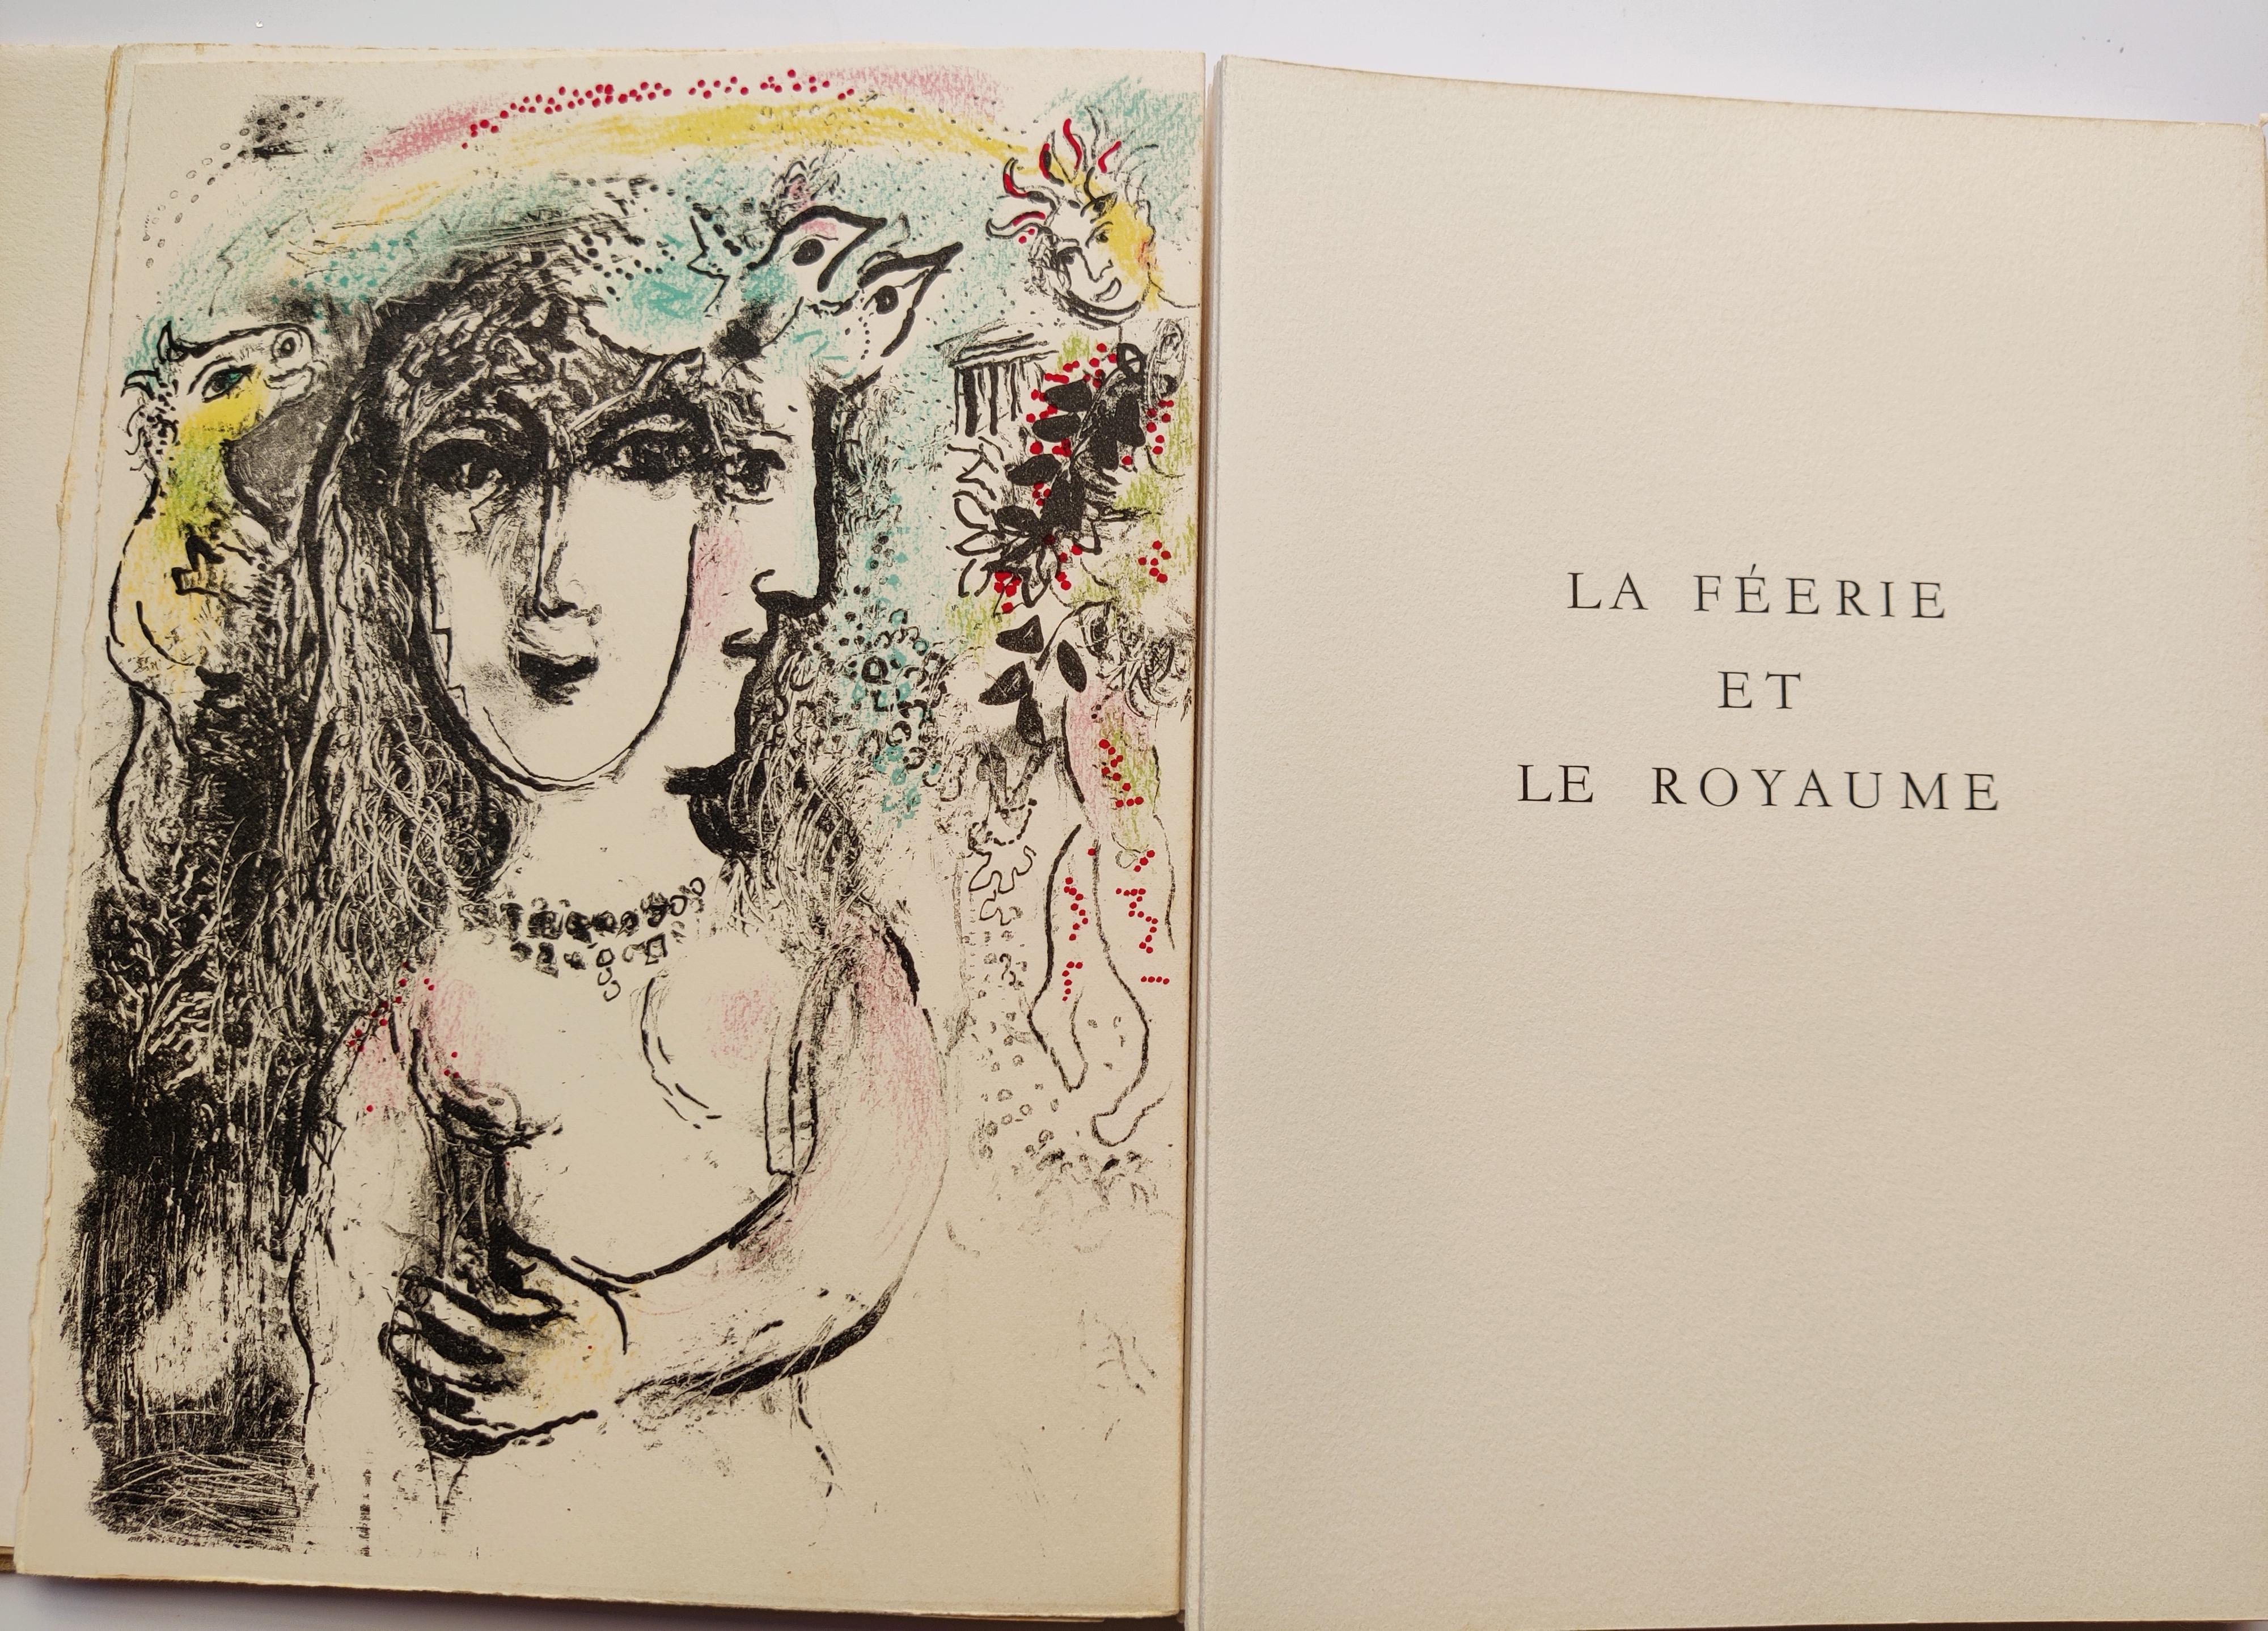 MARC CHAGALL
Camille Bourniquel, La Féerie et le Royaume, Fernand Mourlot, Paris, 1972 (M. 668-677; C. books 88)
The complete set of ten lithographs in colors, 1972
Hors-texte, title page, text in French and justification, on Arches
Signed in pencil